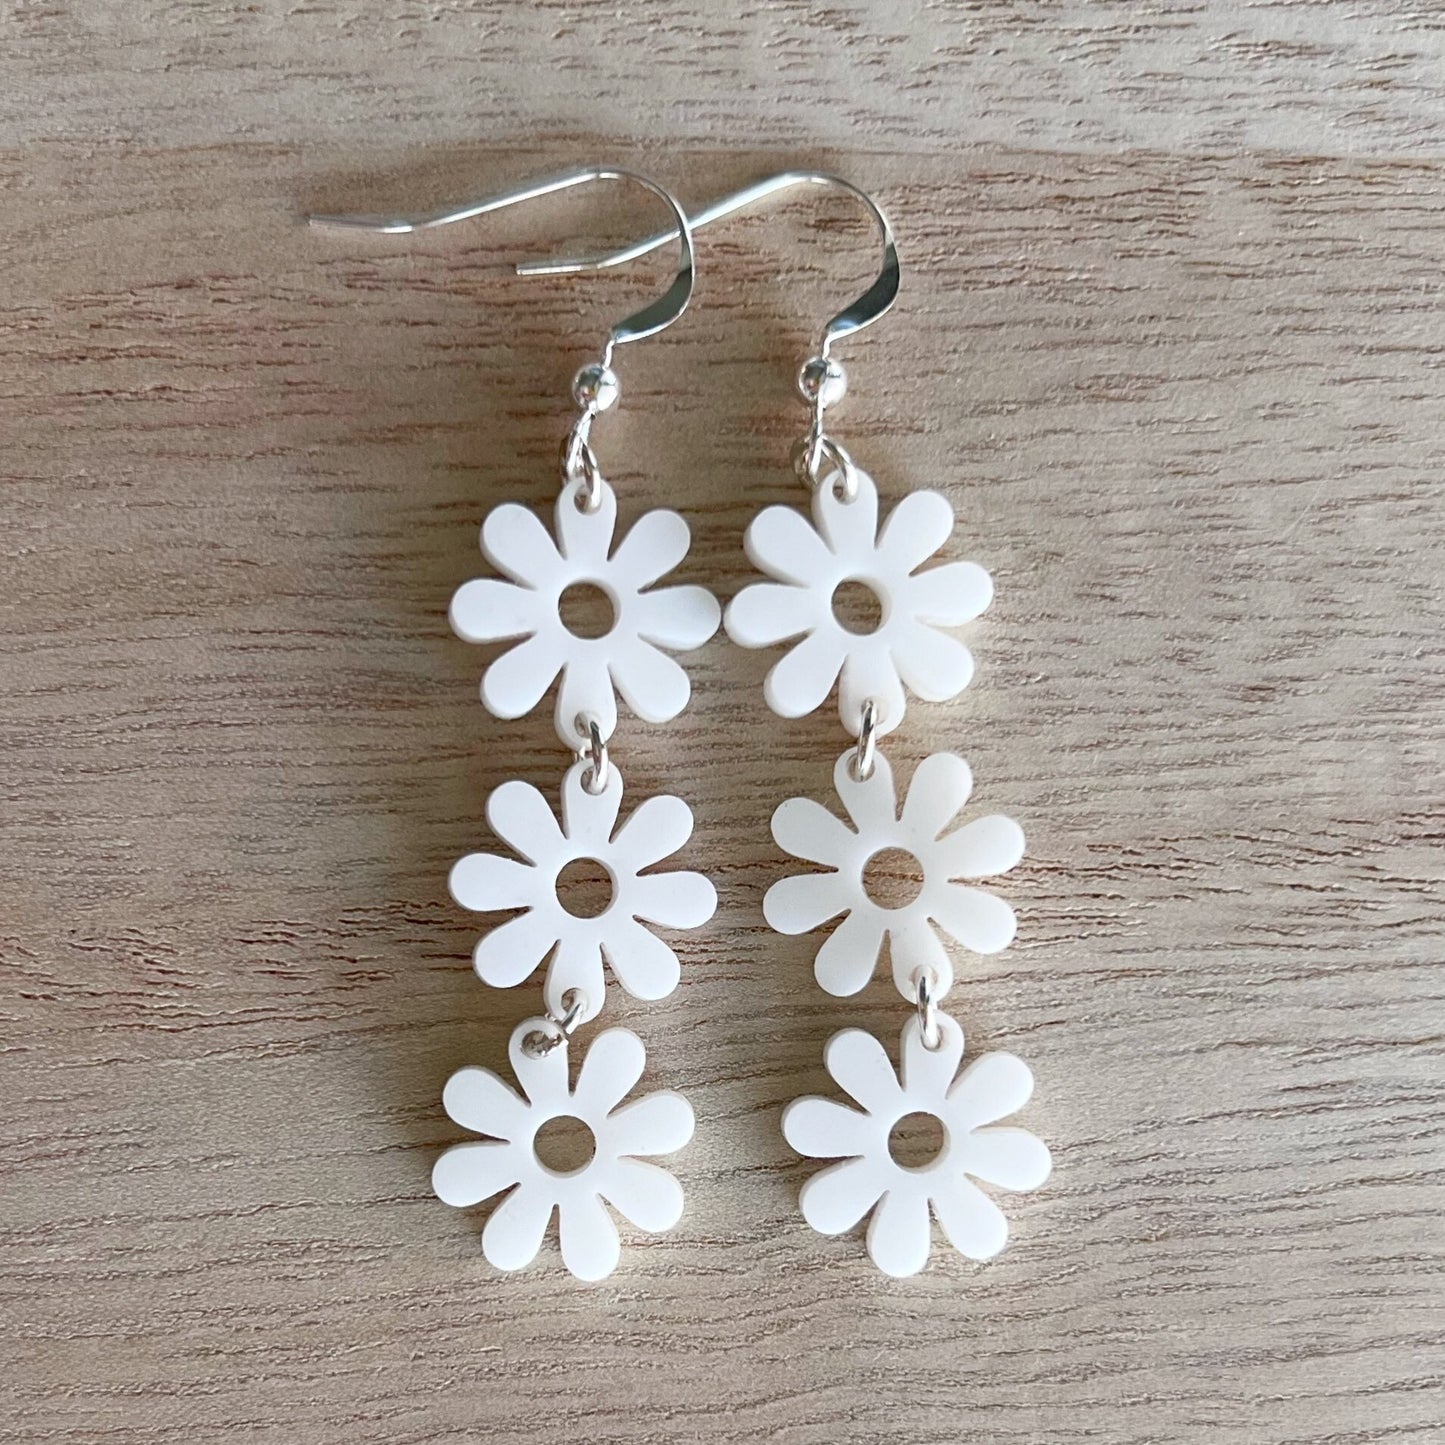 60s 70s White Daisy Floral Retro Flower Power Hippie Vintage inspired Statement Earrings with Sterling Silver Finishes